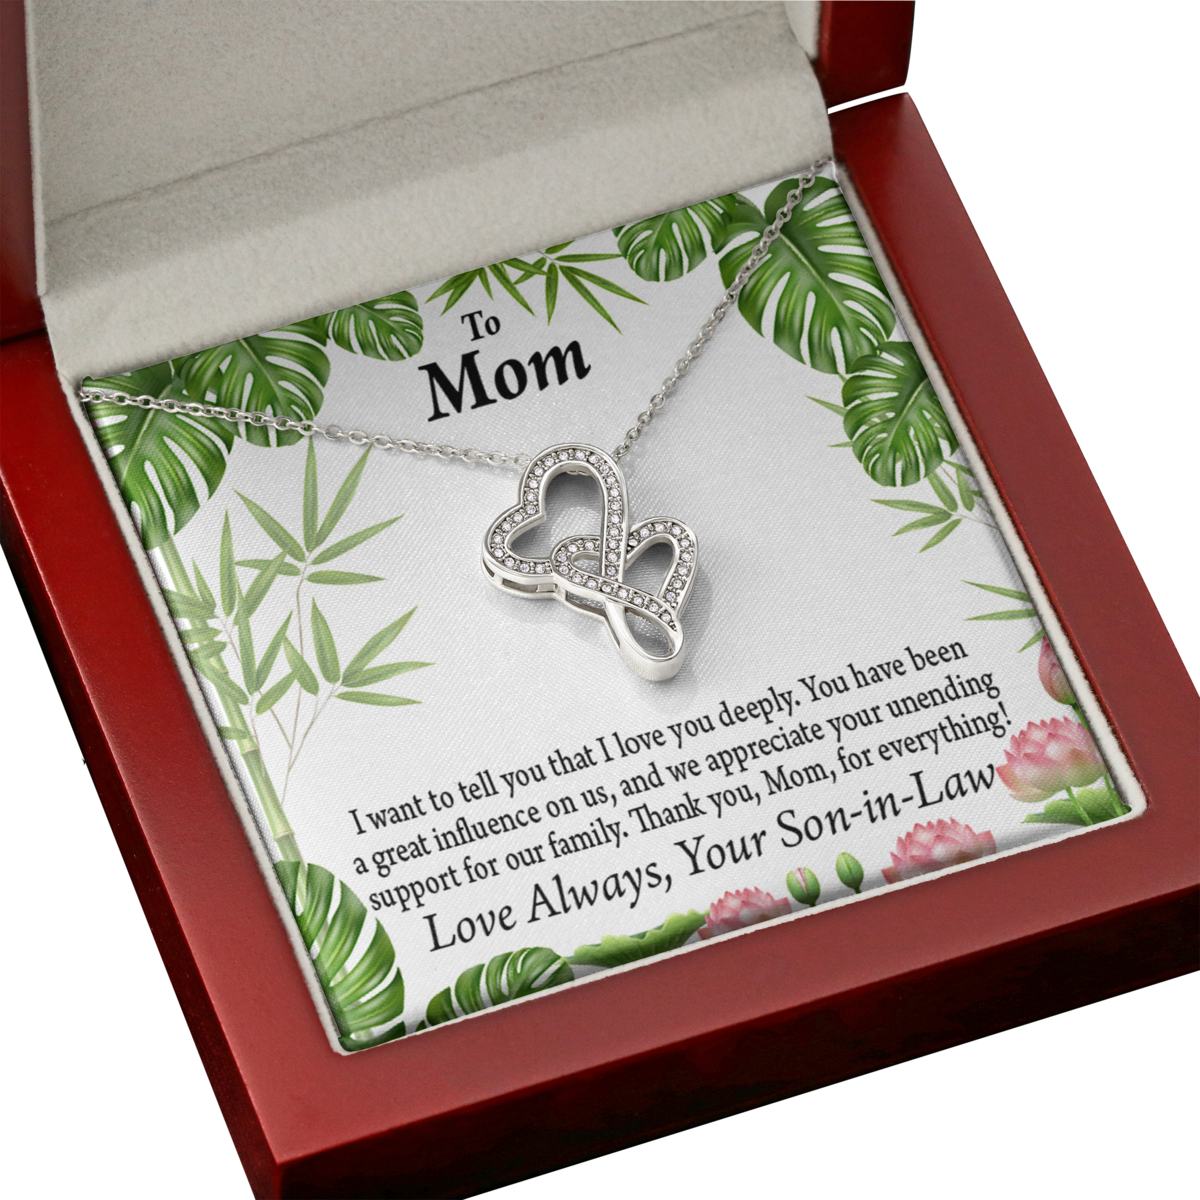 For mother-in-law's - in-law love you deeply double hearts necklace message